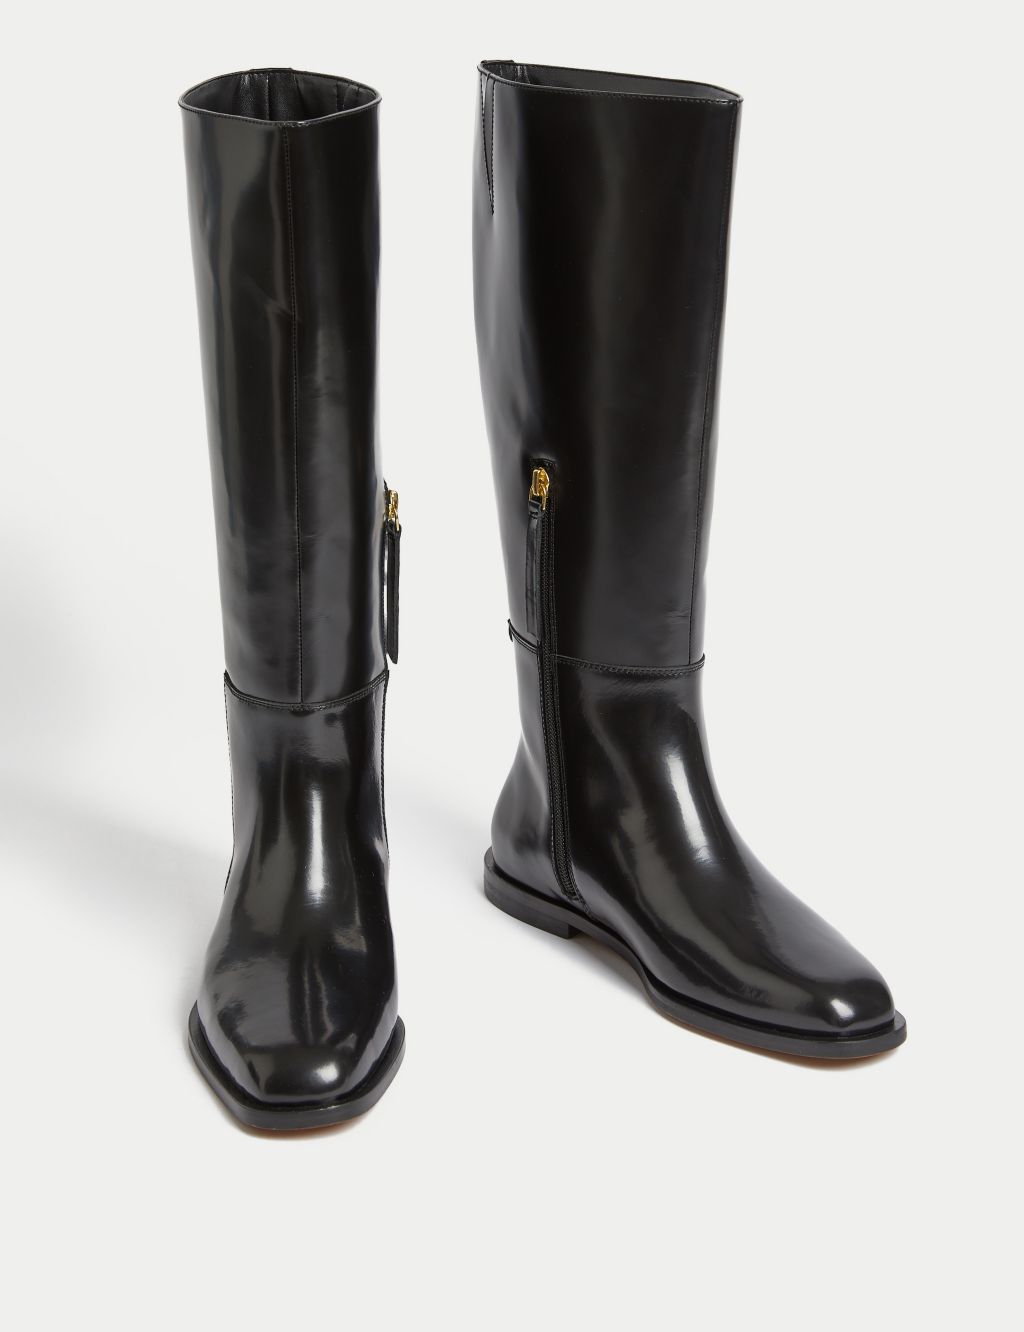 Patent Leather Flat Riding Boots image 2